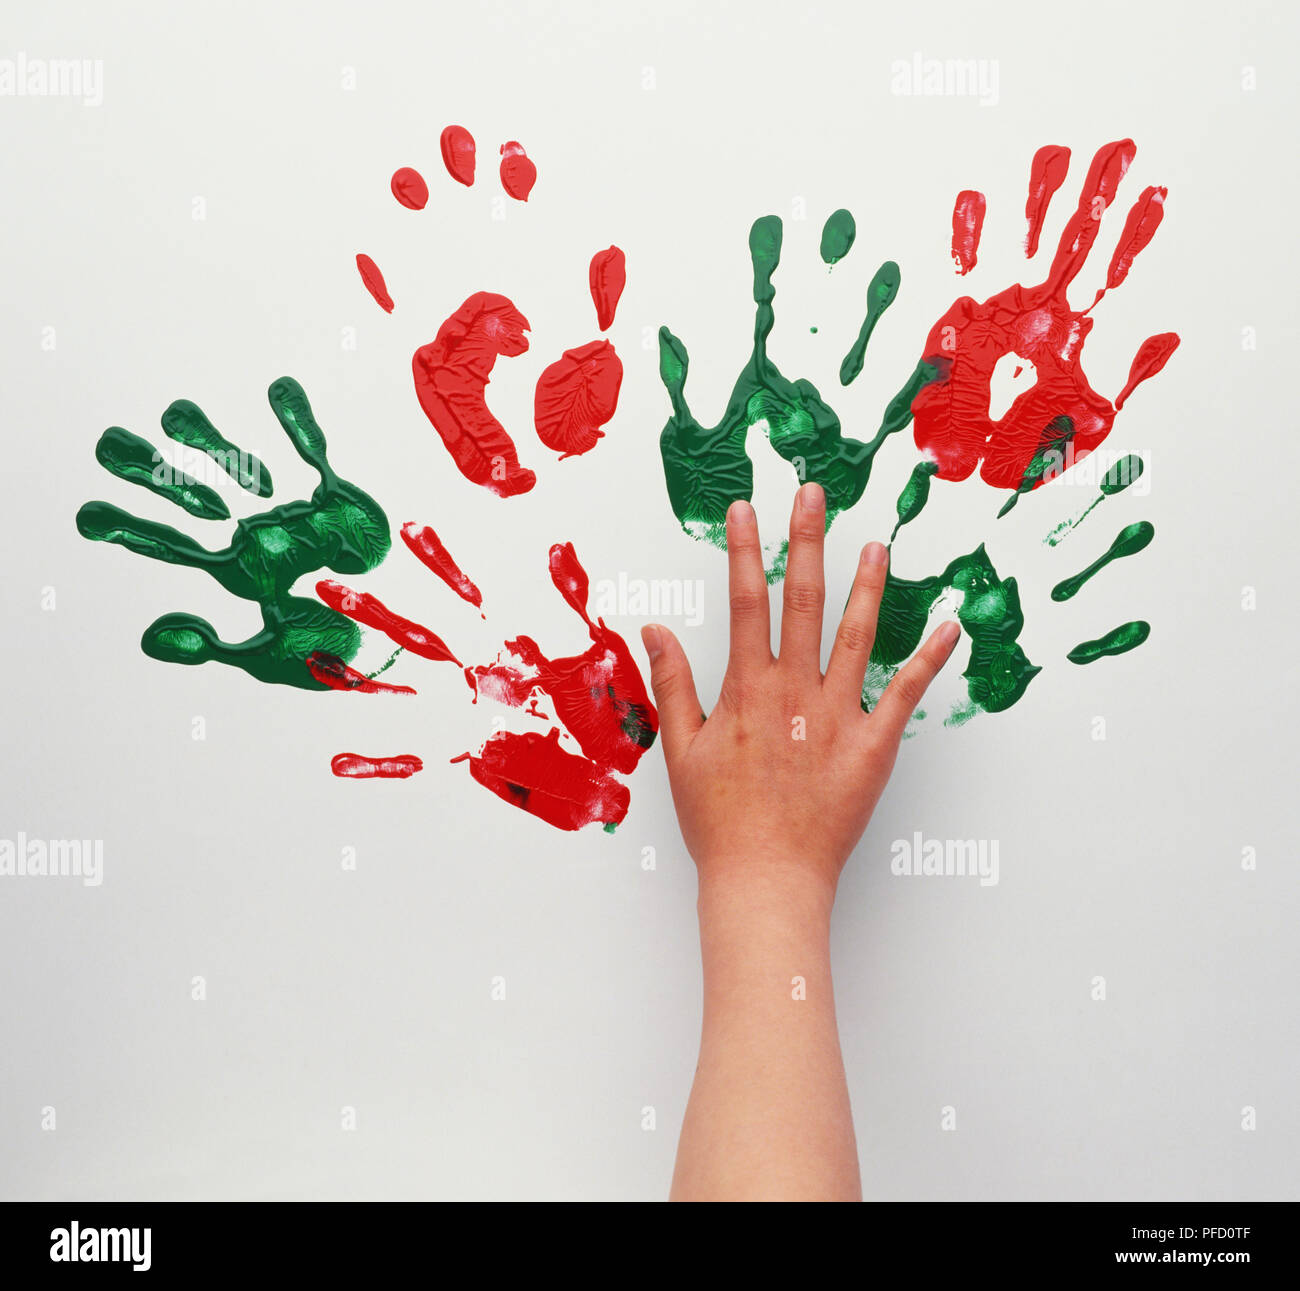 Outstretched hand, green and red watercolour hand shapes on wall. Stock Photo